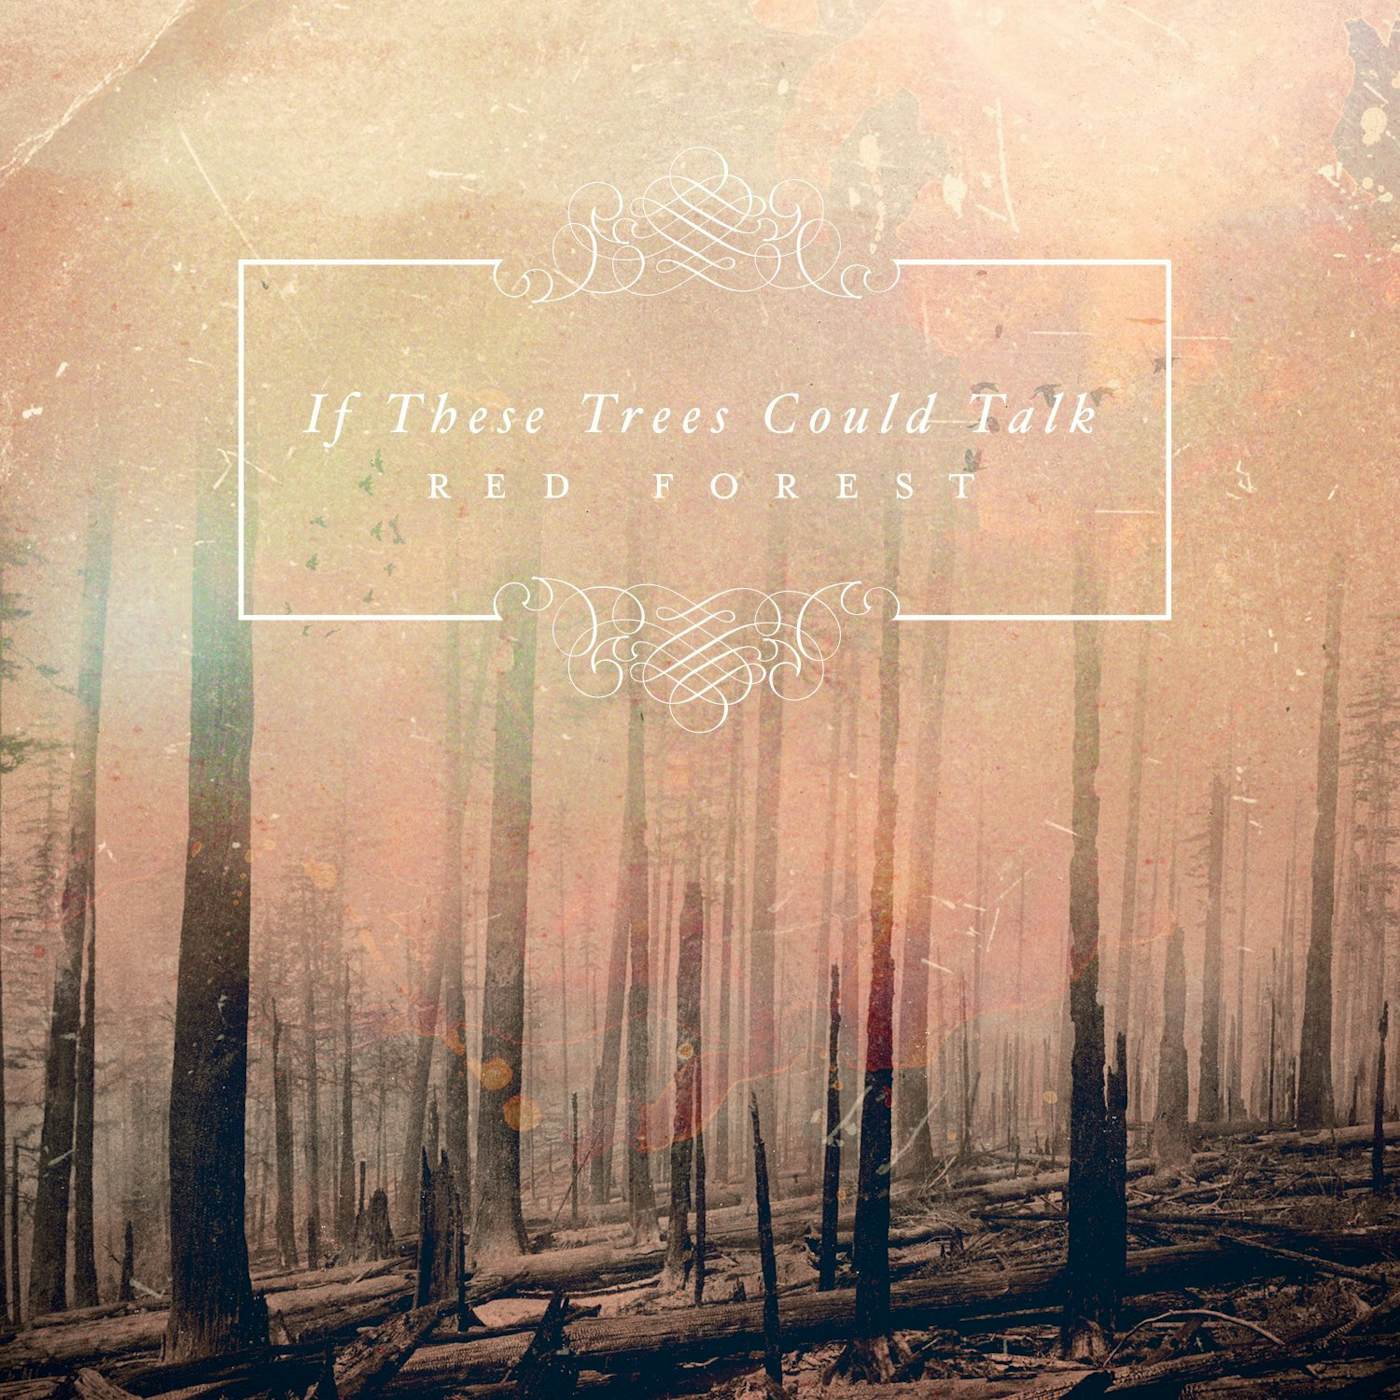 If These Trees Could Talk RED FOREST CD